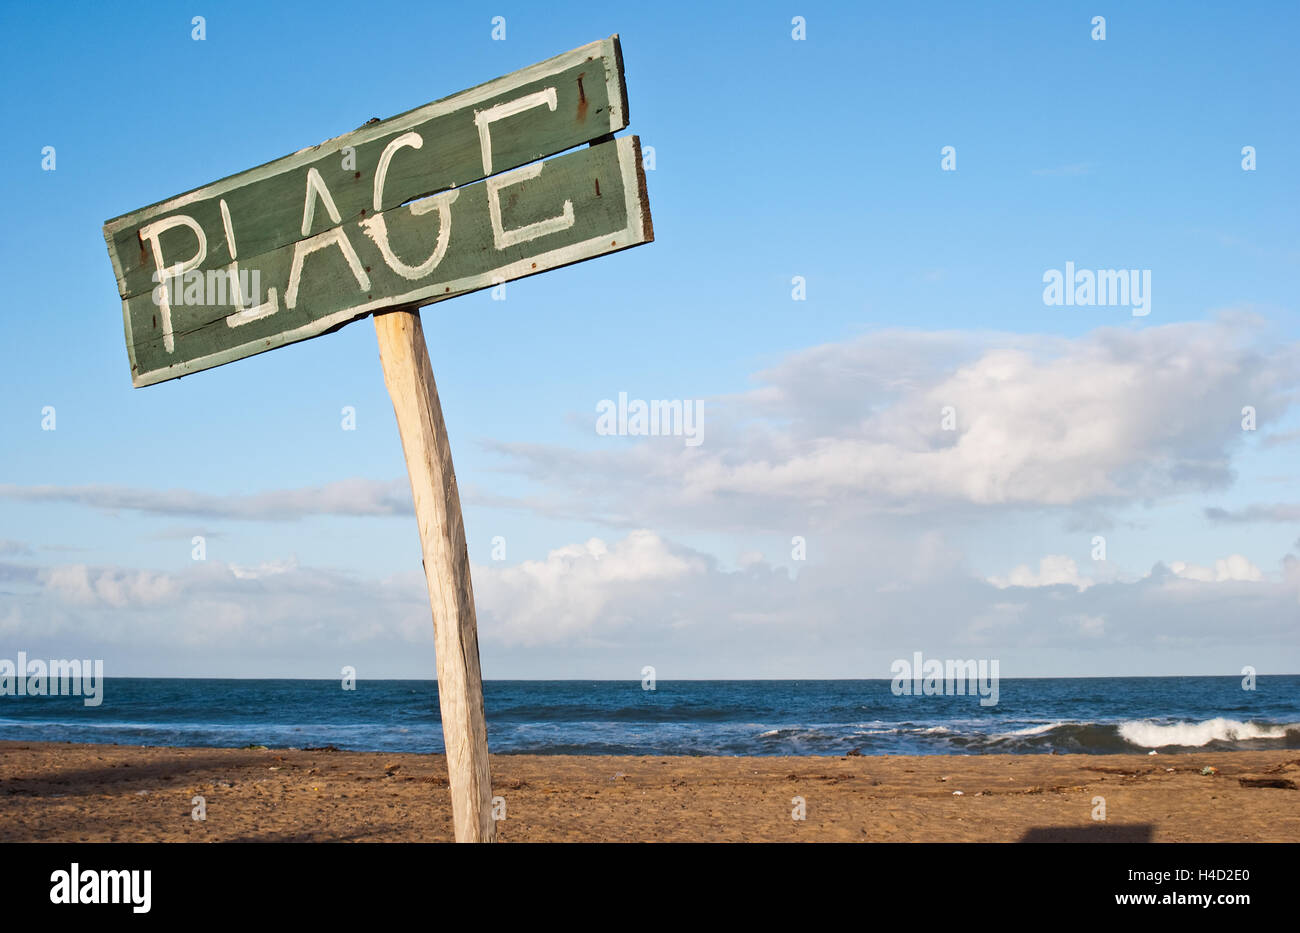 Signpost on a beach. The word 'plage' (i.e. beach in french language) is written on the signpost. ( Madagascar) Stock Photo